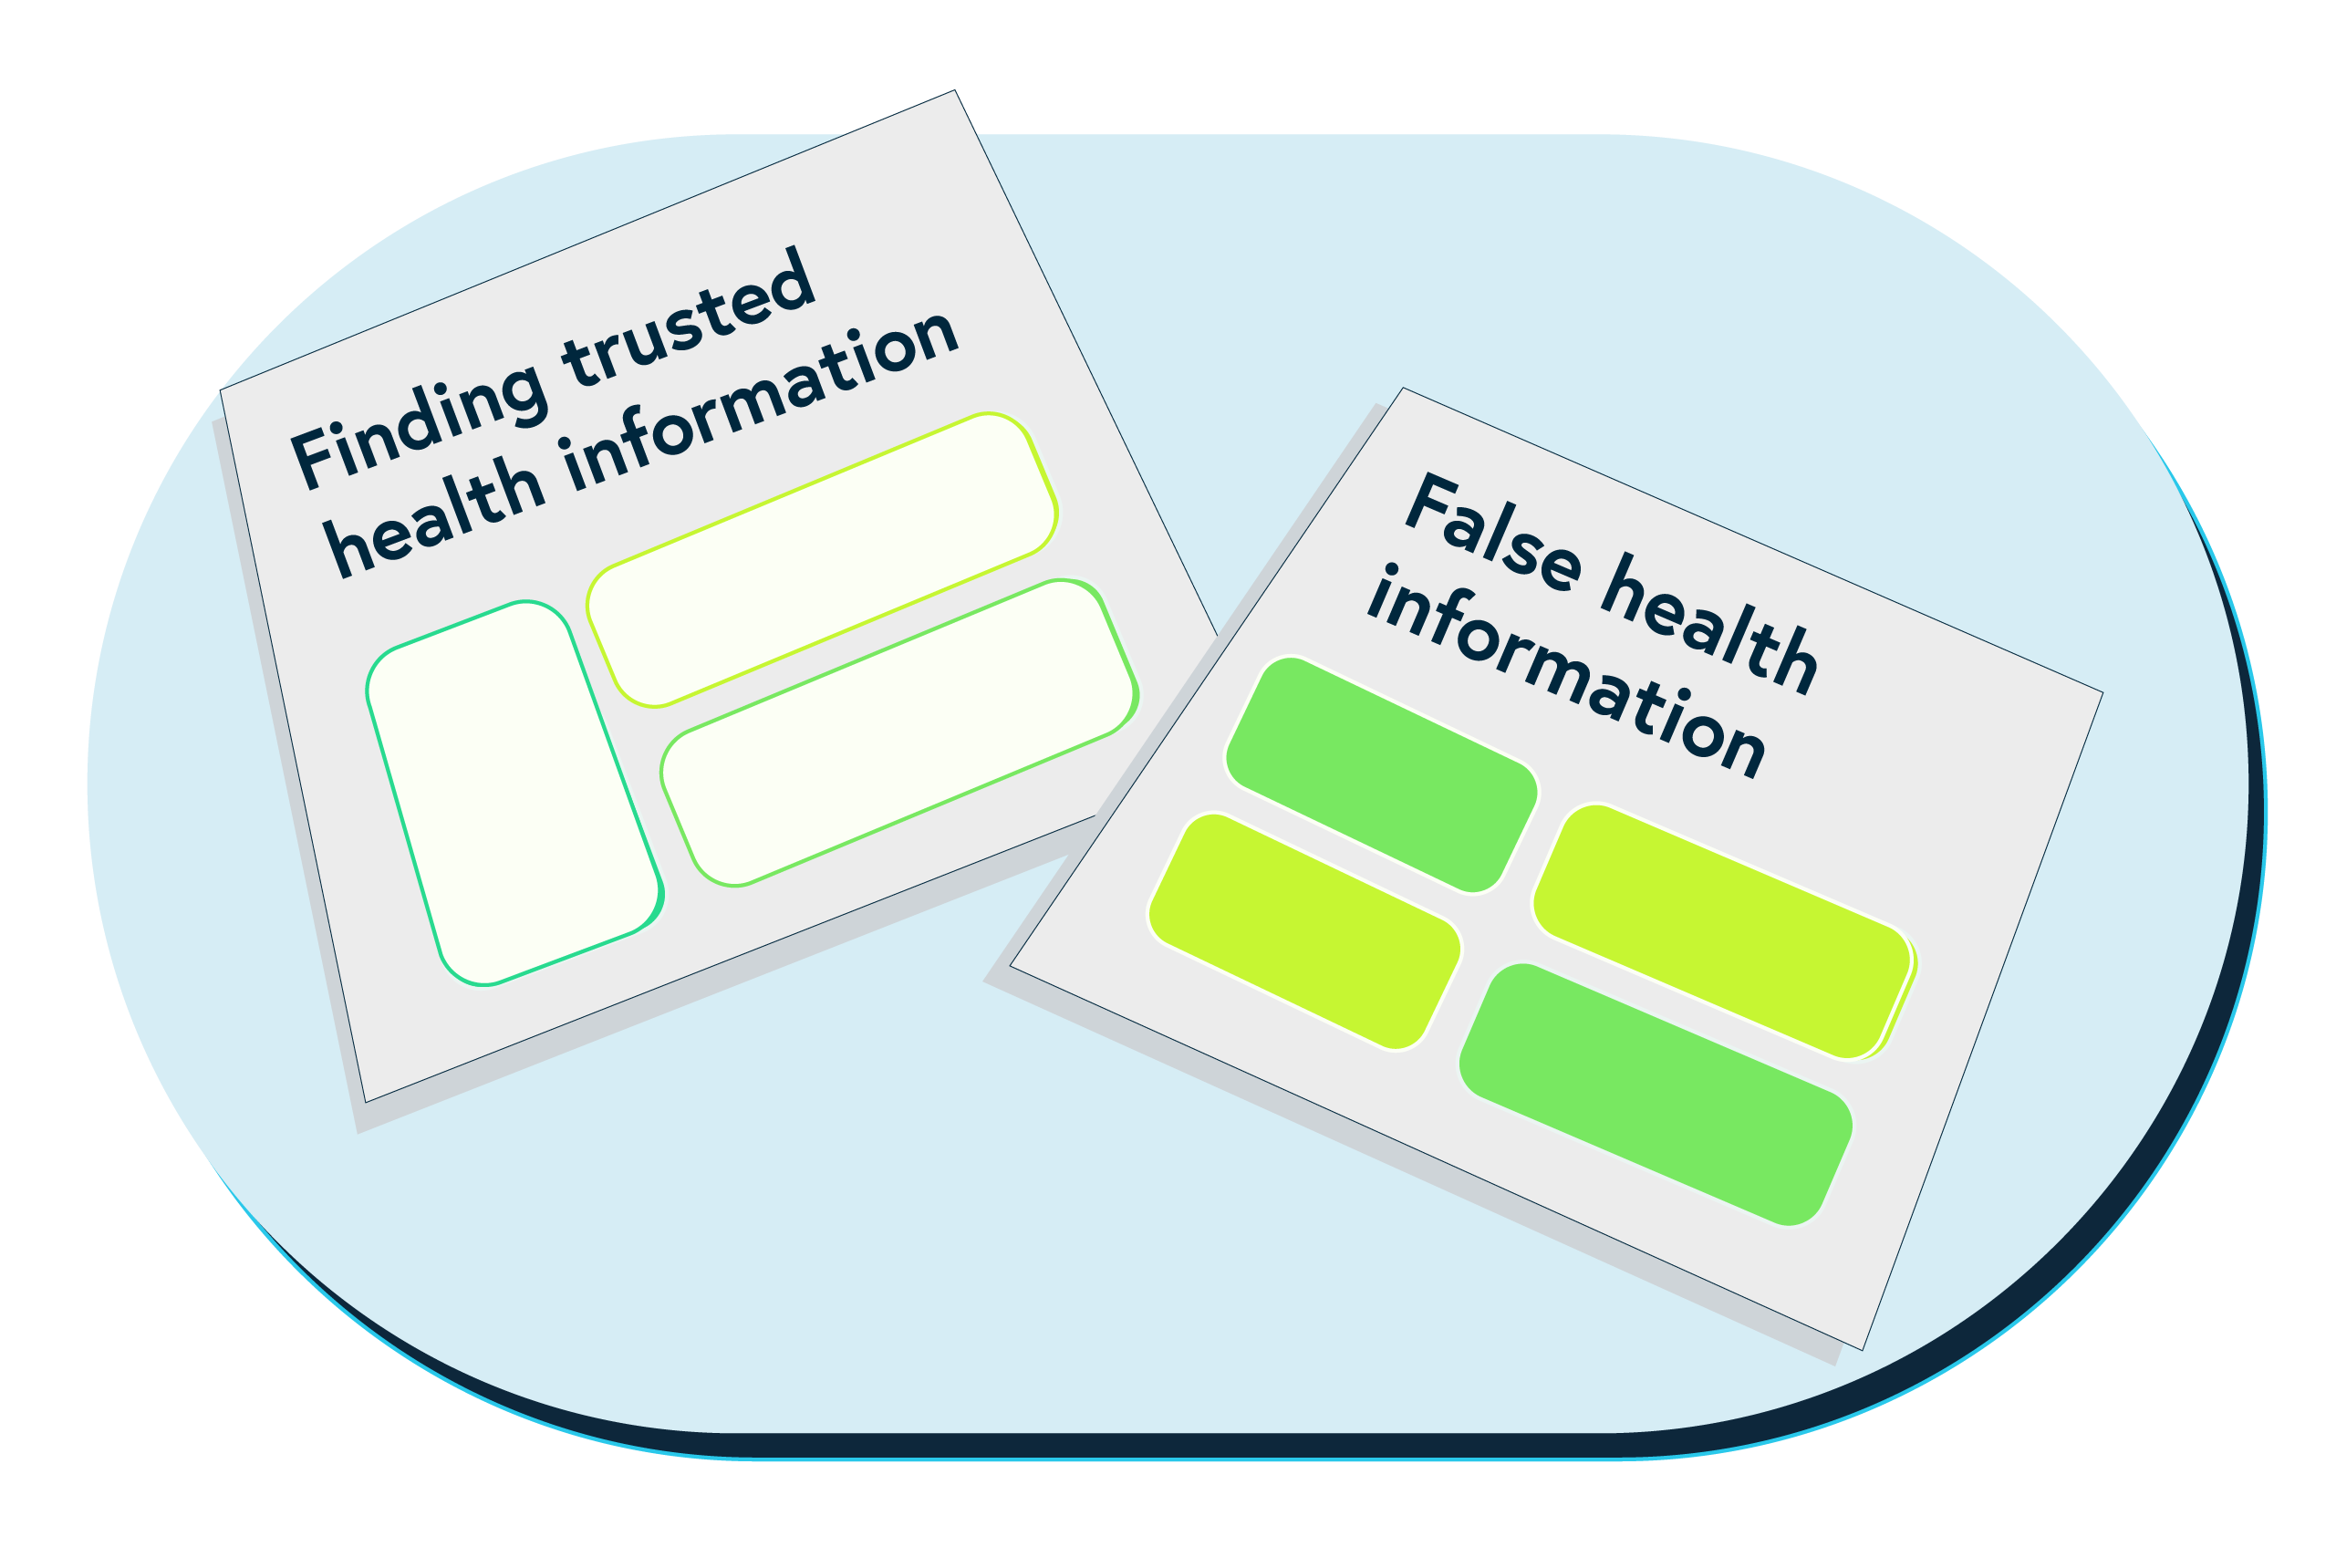 This image shows simplified versions of the covers of two of our top tips sheets – Finding trusted health information and How to spot false health information